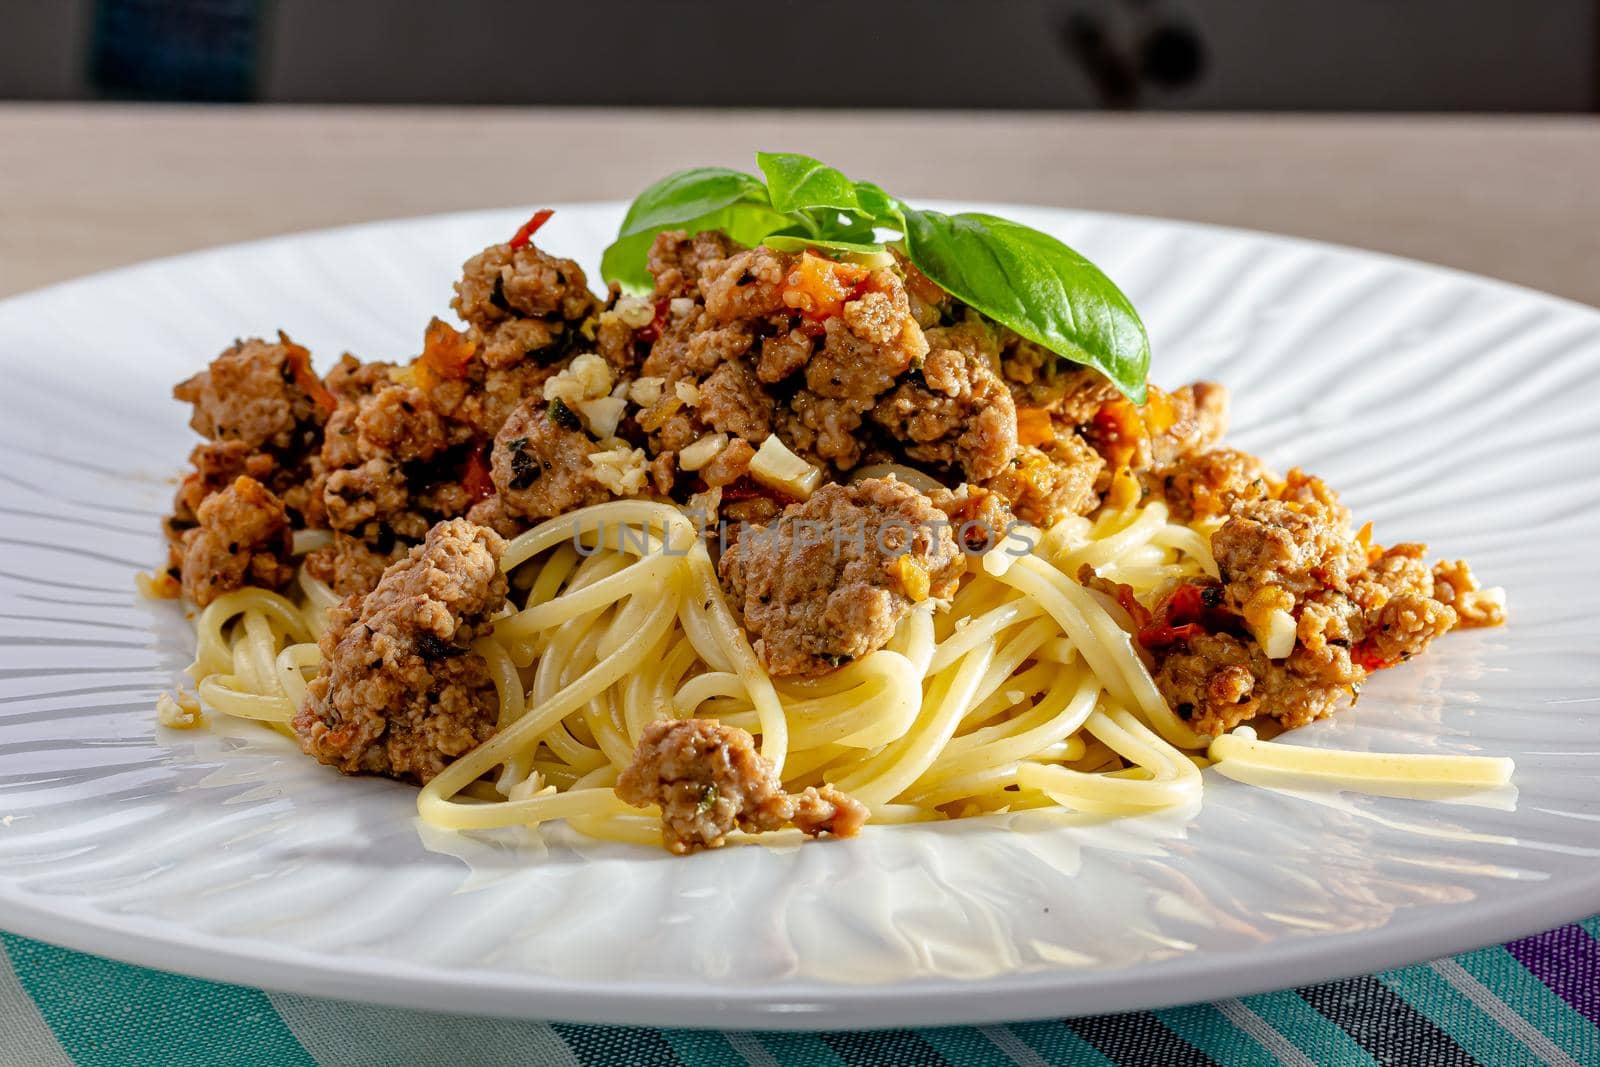 Rich spicy Italian spaghetti Bolognaise with parmesan cheese and a fresh green basil leaves viewed from overhead on a white plate in square format.